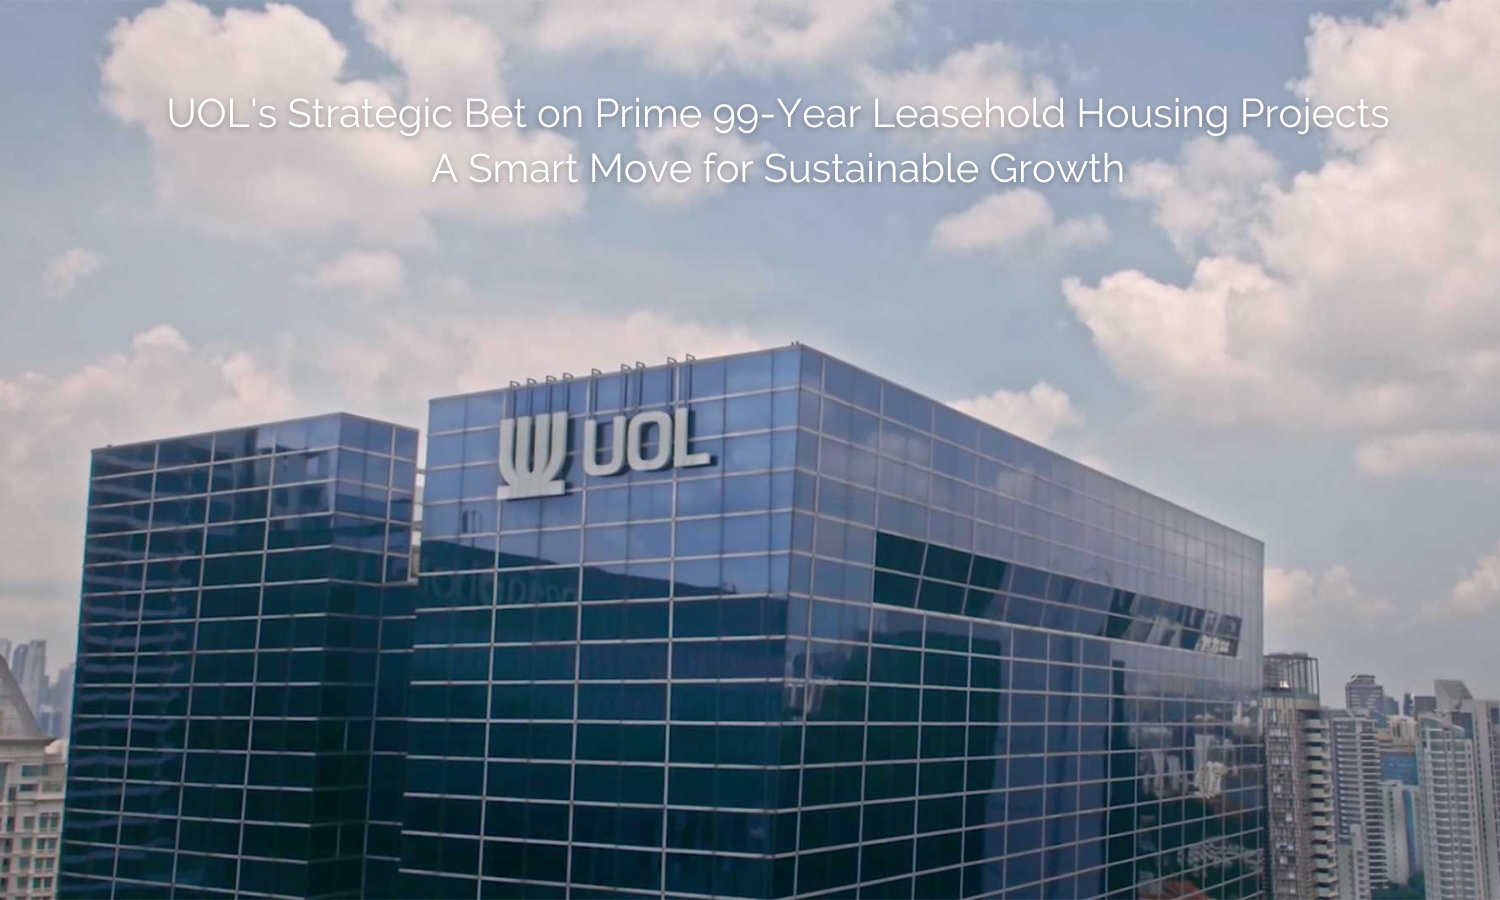 UOL's Strategic Bet on Prime 99-Year Leasehold Housing Projects: A Smart Move for Sustainable Growth